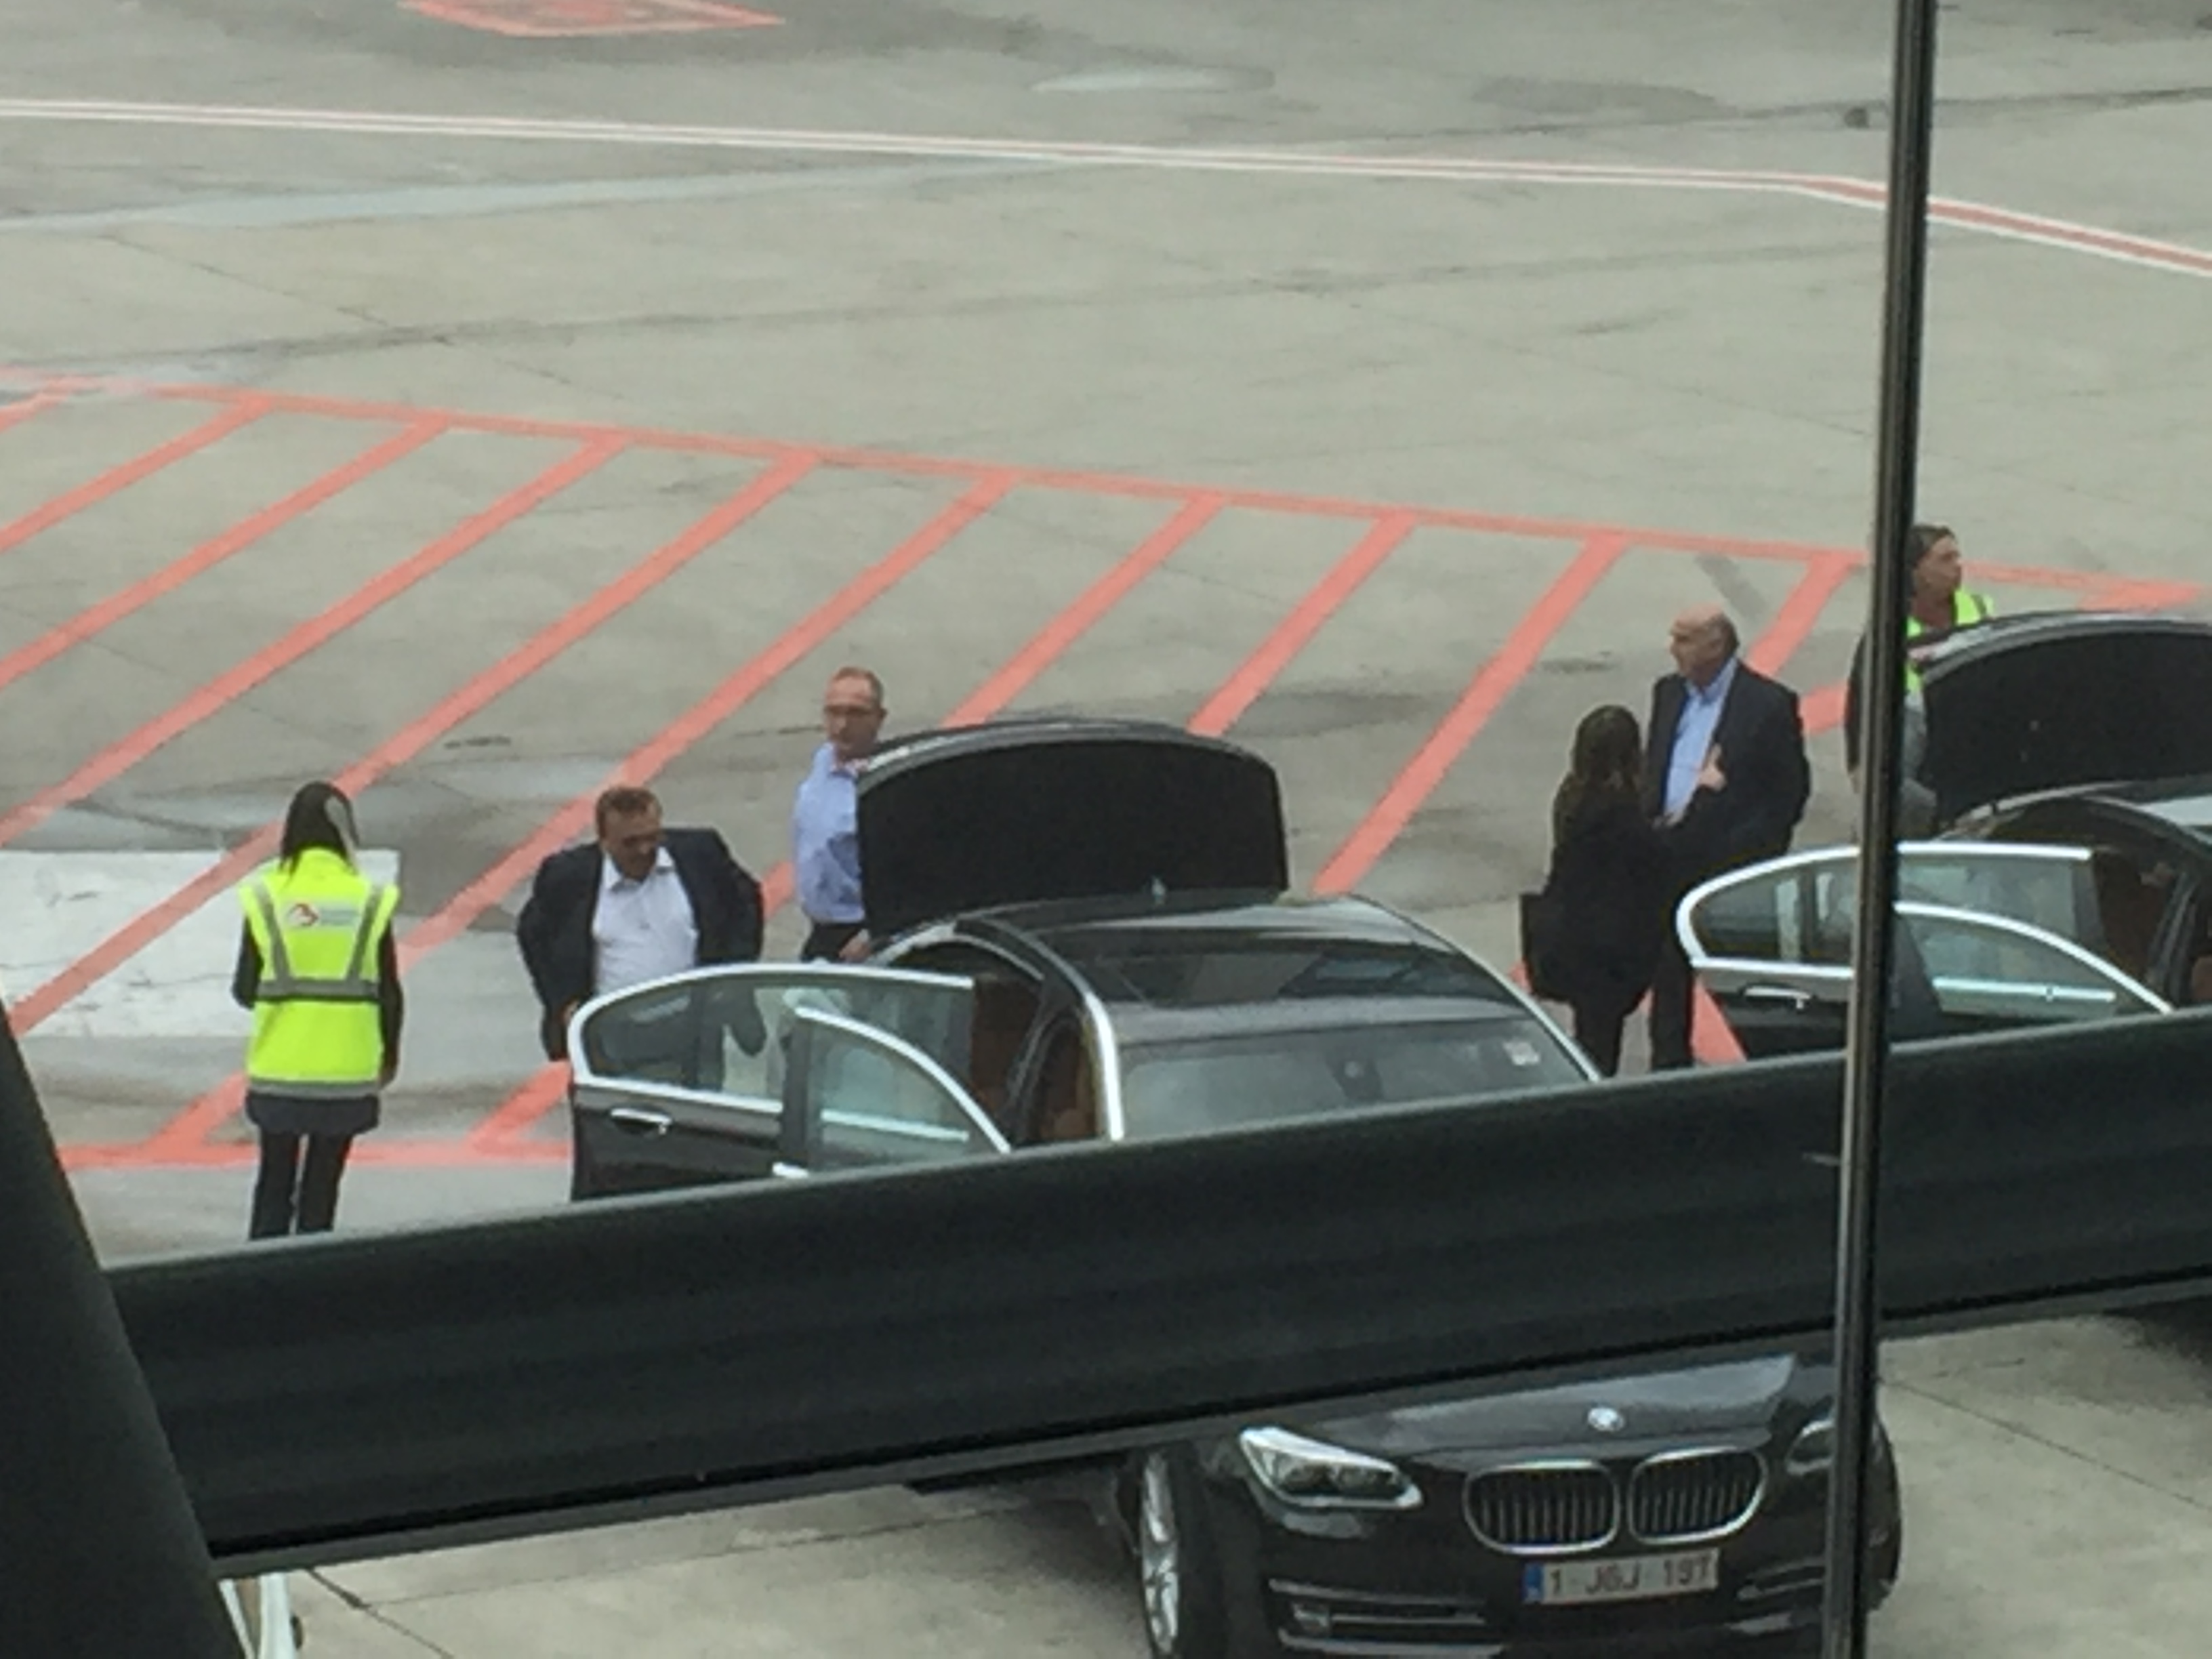 The VIPs arrive at Brussels airport.